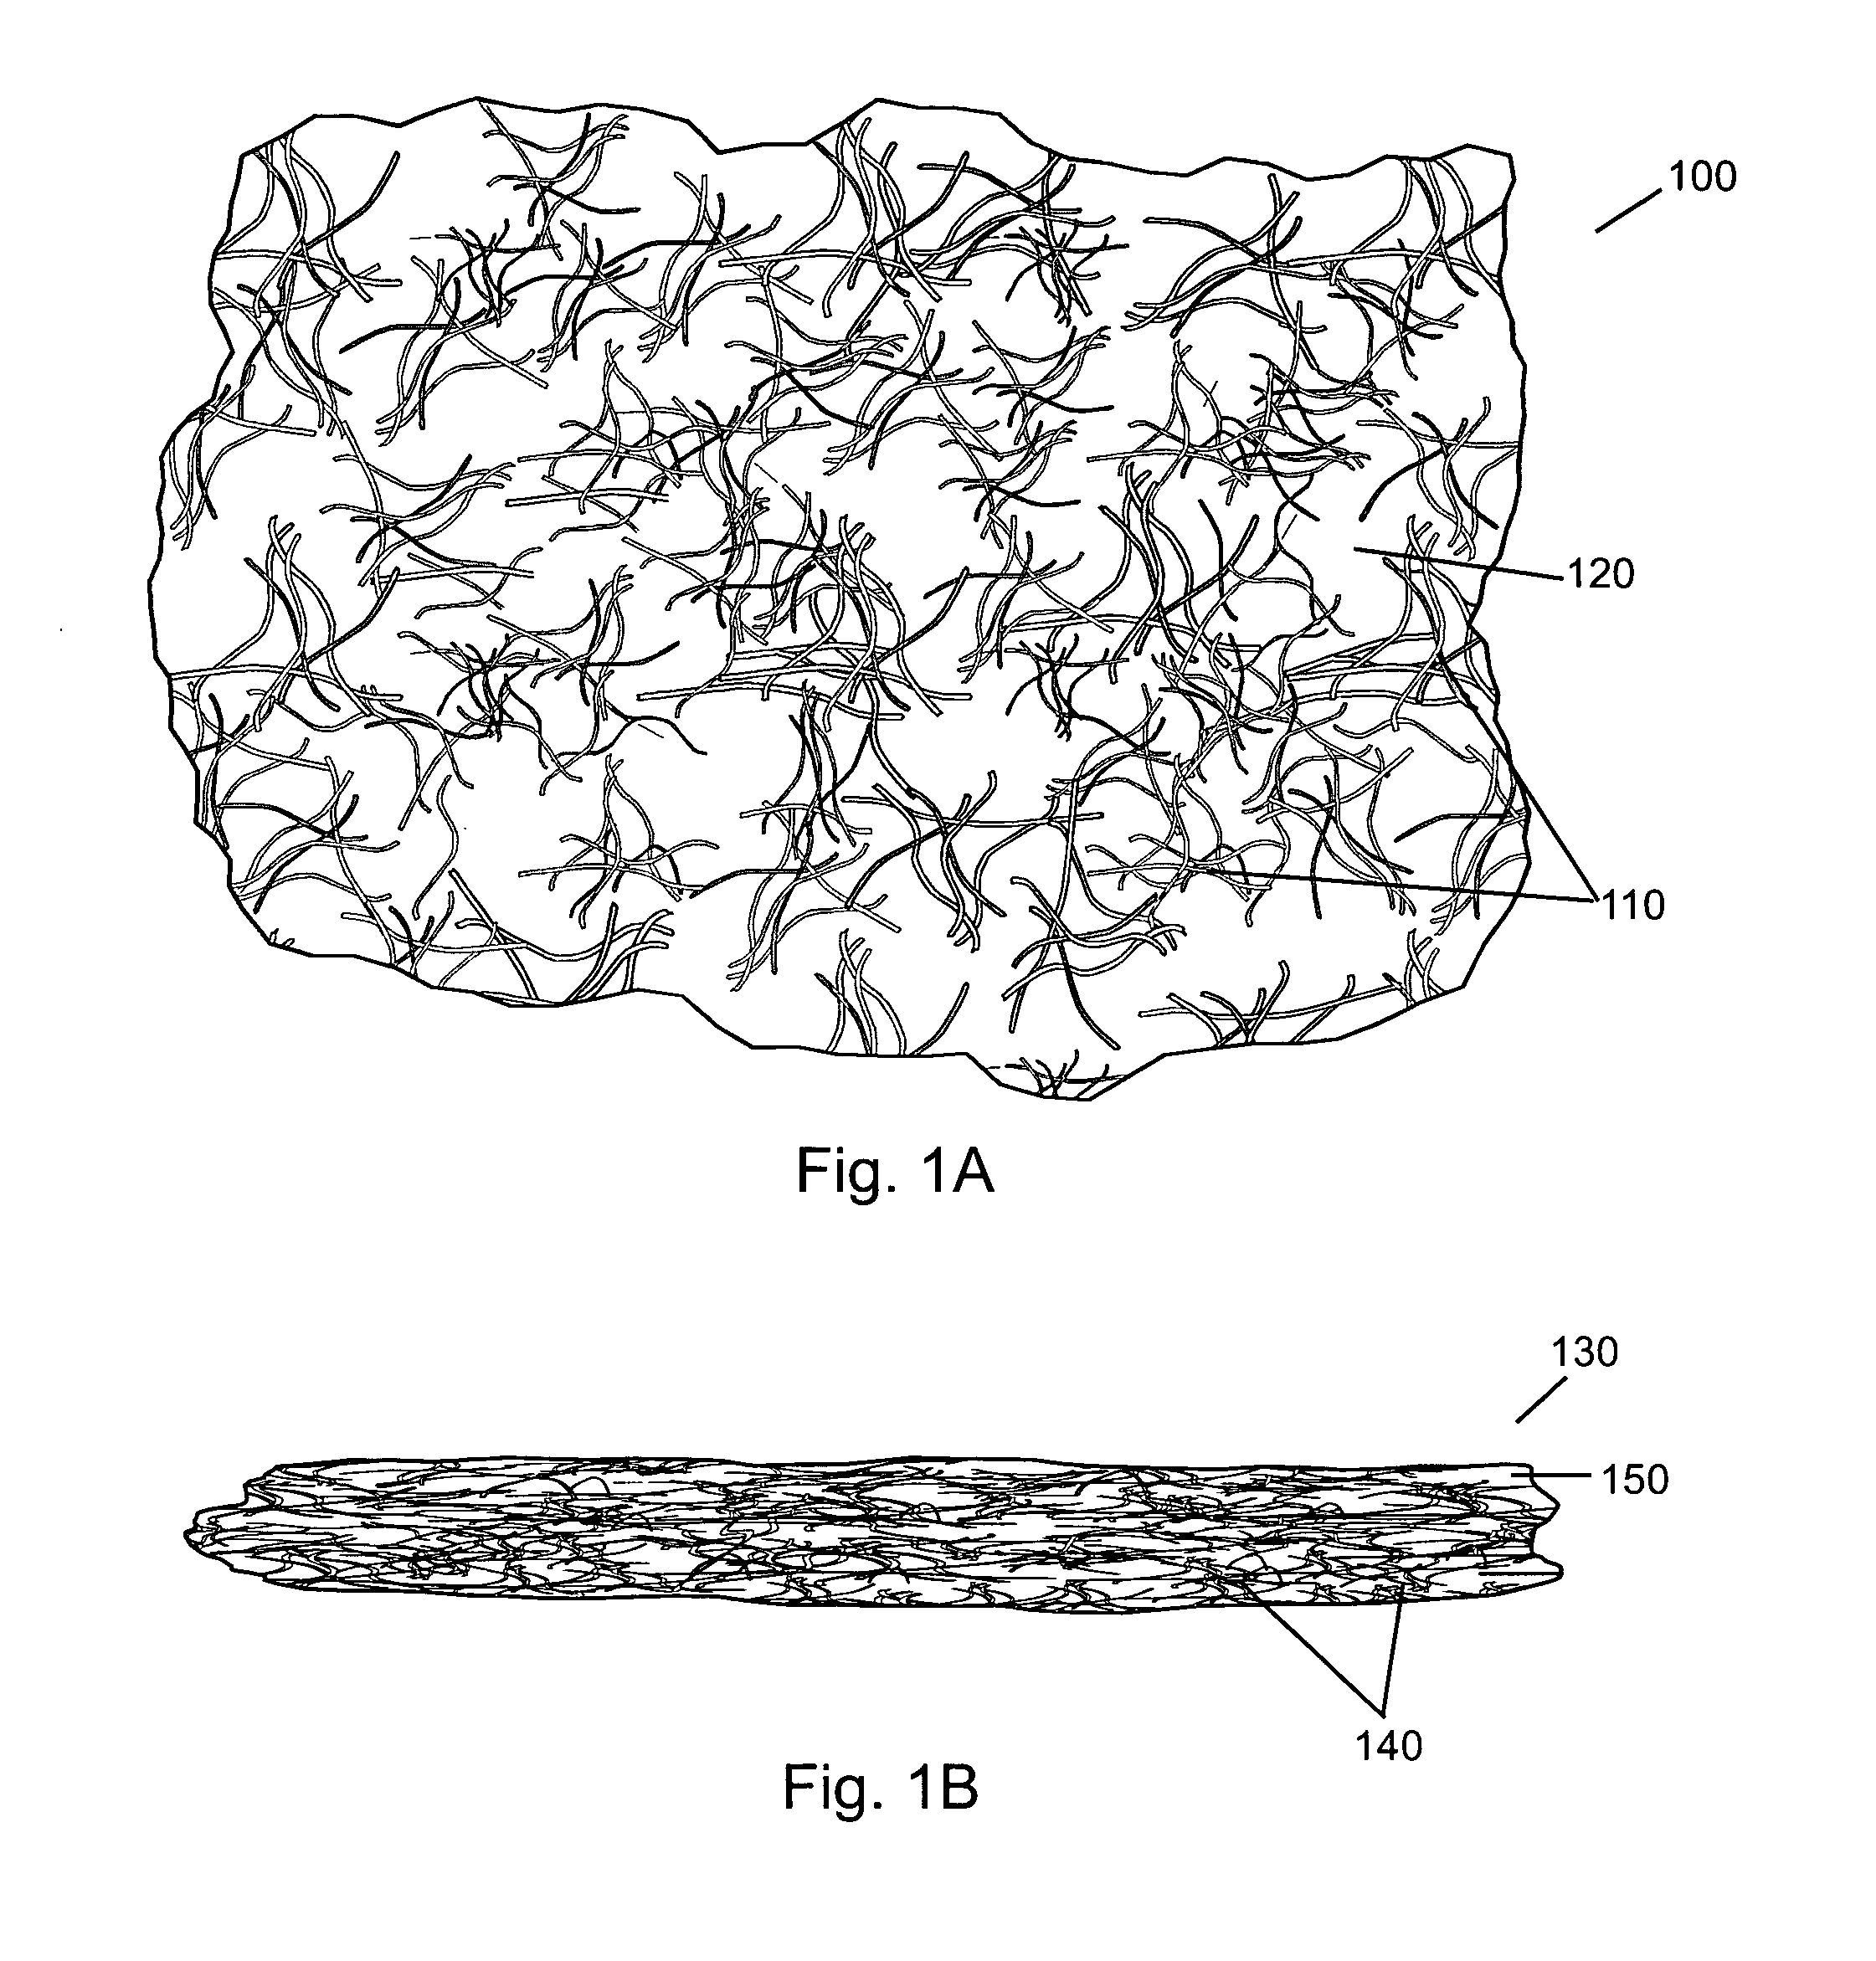 Compressed high density fibrous polymers suitable for implant